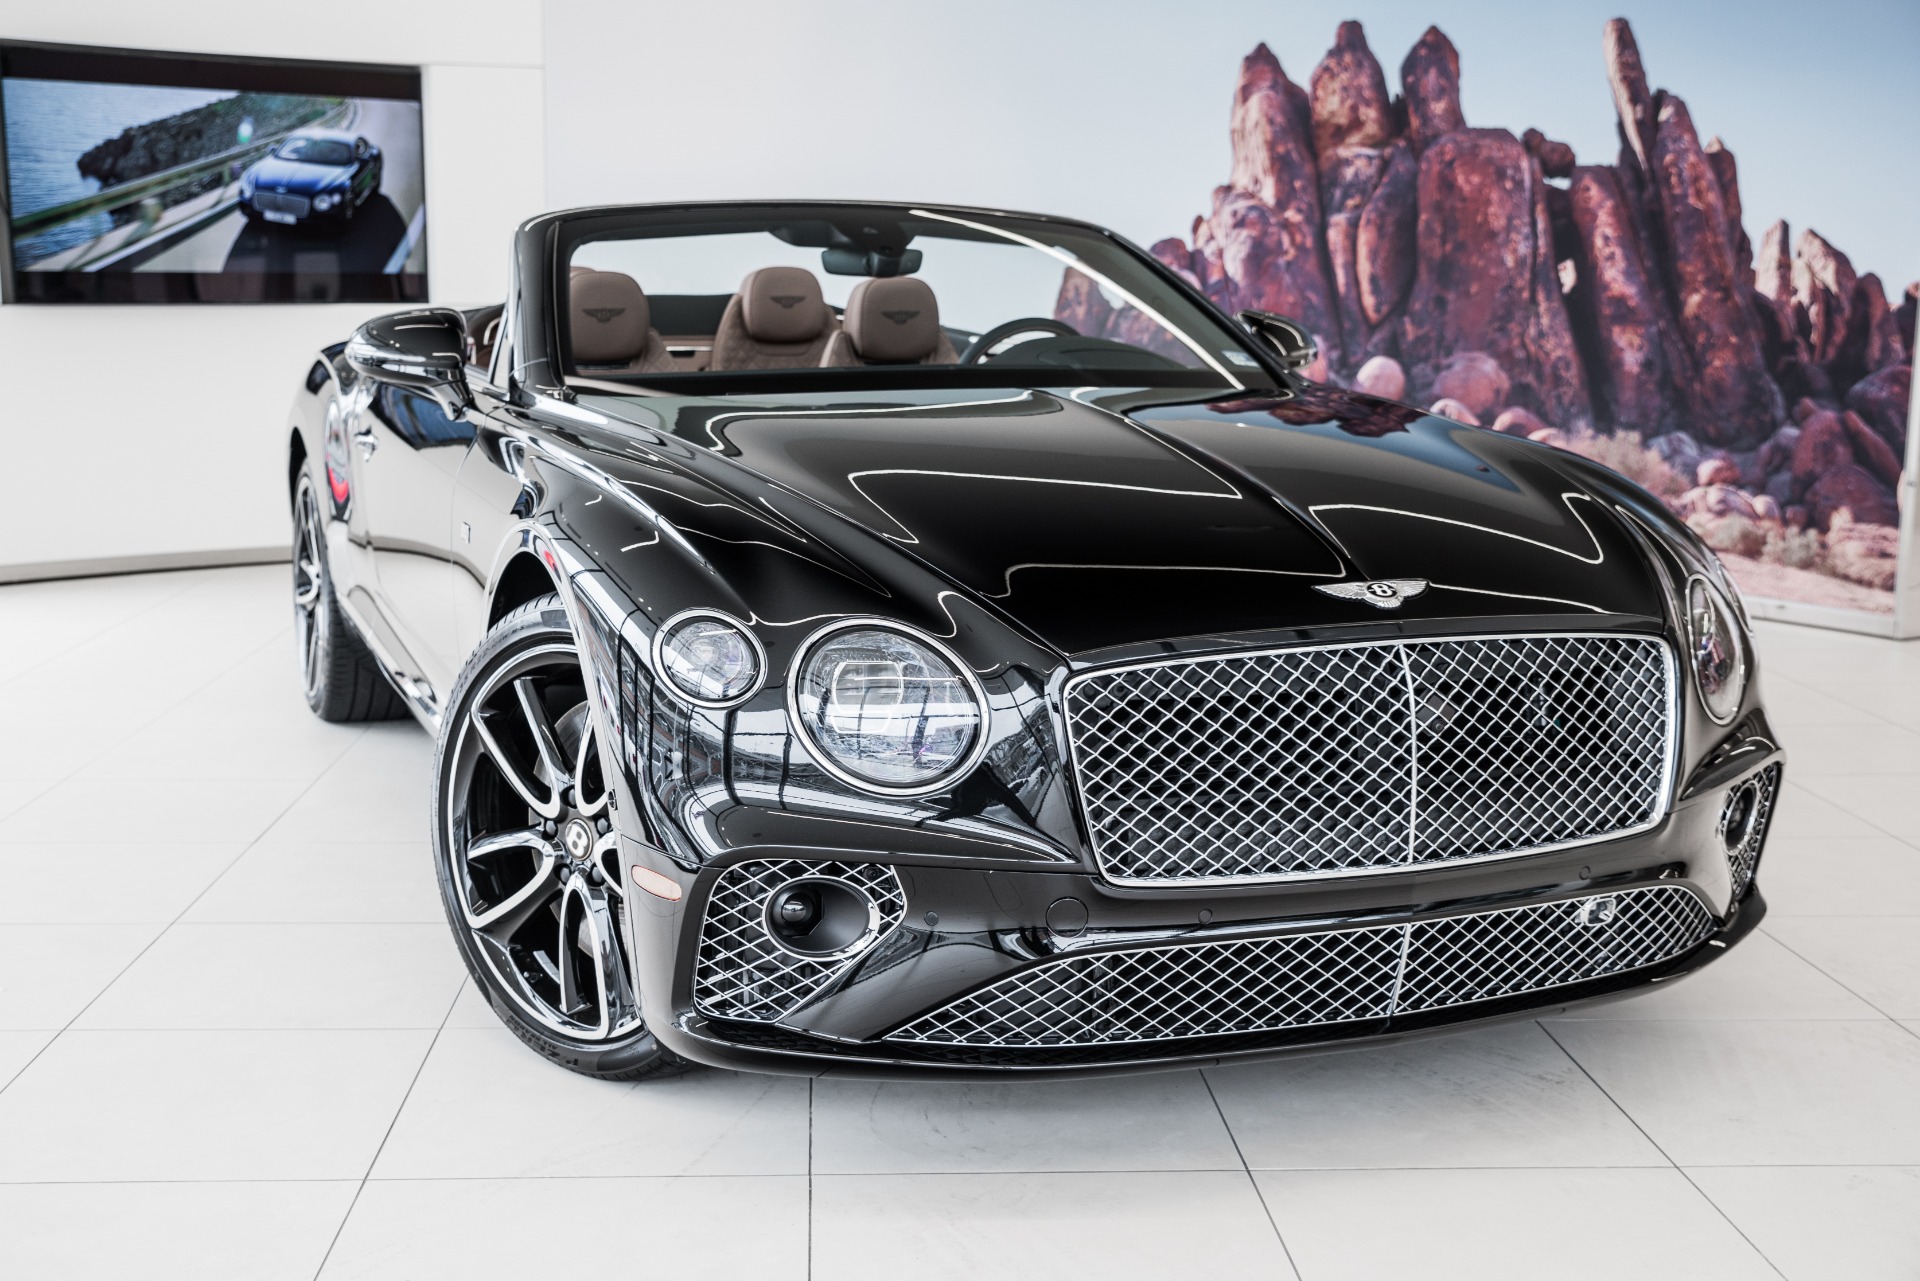 2020 Bentley Continental Gt V8 Stock 20n076245 For Sale Near Vienna Va Va Bentley Dealer For Sale In Vienna Va 20n076245 Exclusive Automotive Group